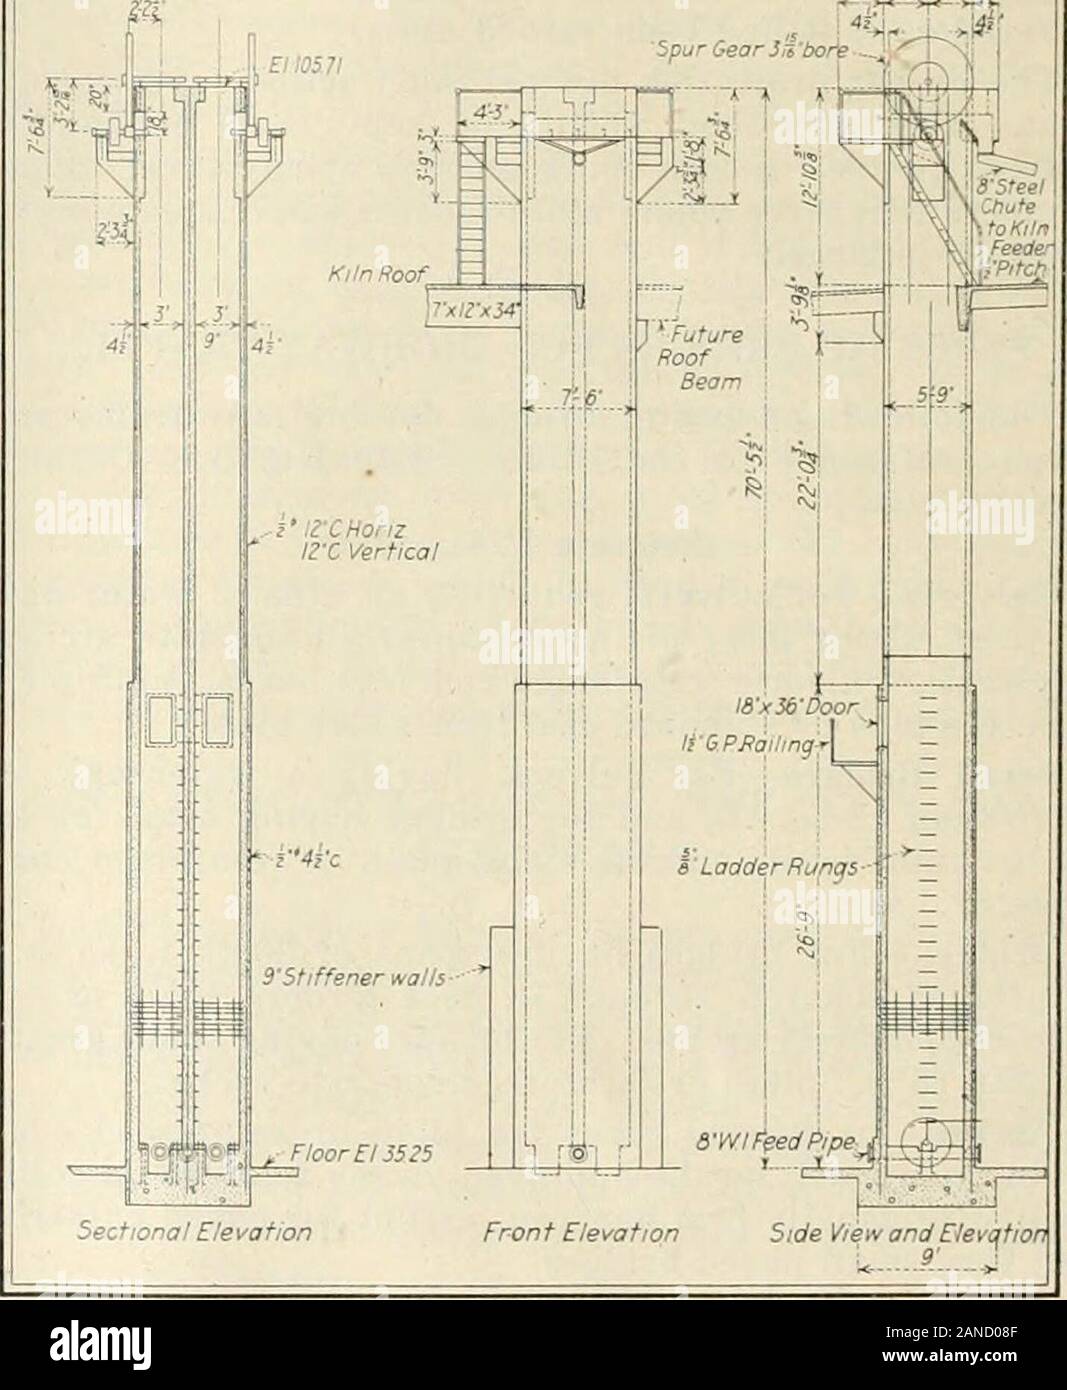 Engineering and Contracting . - SEmerqencupipe for pump connSsi  -g- SiVlPipe talOOObbl slurry 4 Elet^ator storage basin Plan of Elevator Head ^fil5rd44Sproikef? Sprocket shaft ZHD iGrease PipiPlan of Slurry Elevator Boot. Fig. 1- -Sectional Elevation, Front Elevation and Side Elevation ofReinforced Concrete Slurry Elevator. which it is drawn to a large mixing basin holding about1,000 bbls. An Ingersoll-Rand air lift pumping system then pumpsit over to a 2,000-bbl. reinforced concrete storage basinwhich is 26 ft. deep, and is built between the 4th and5th piers of the 210-ft. rotary kiln, and Stock Photo